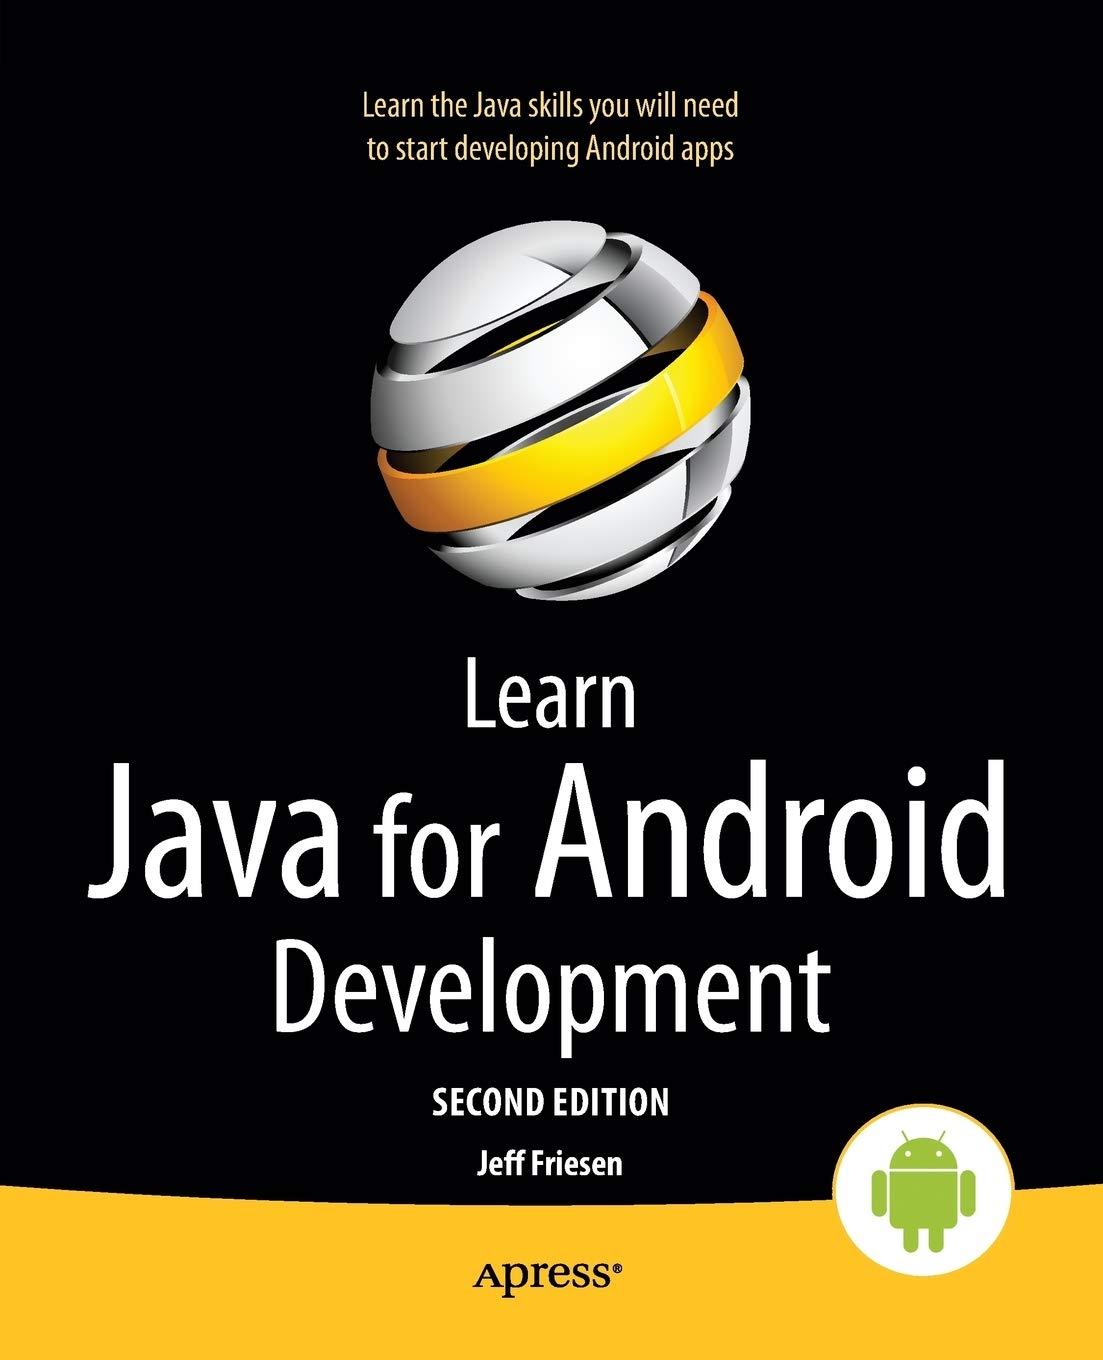 learn java for android development 2nd edition jeff friesen 1430257229, 9781430257226